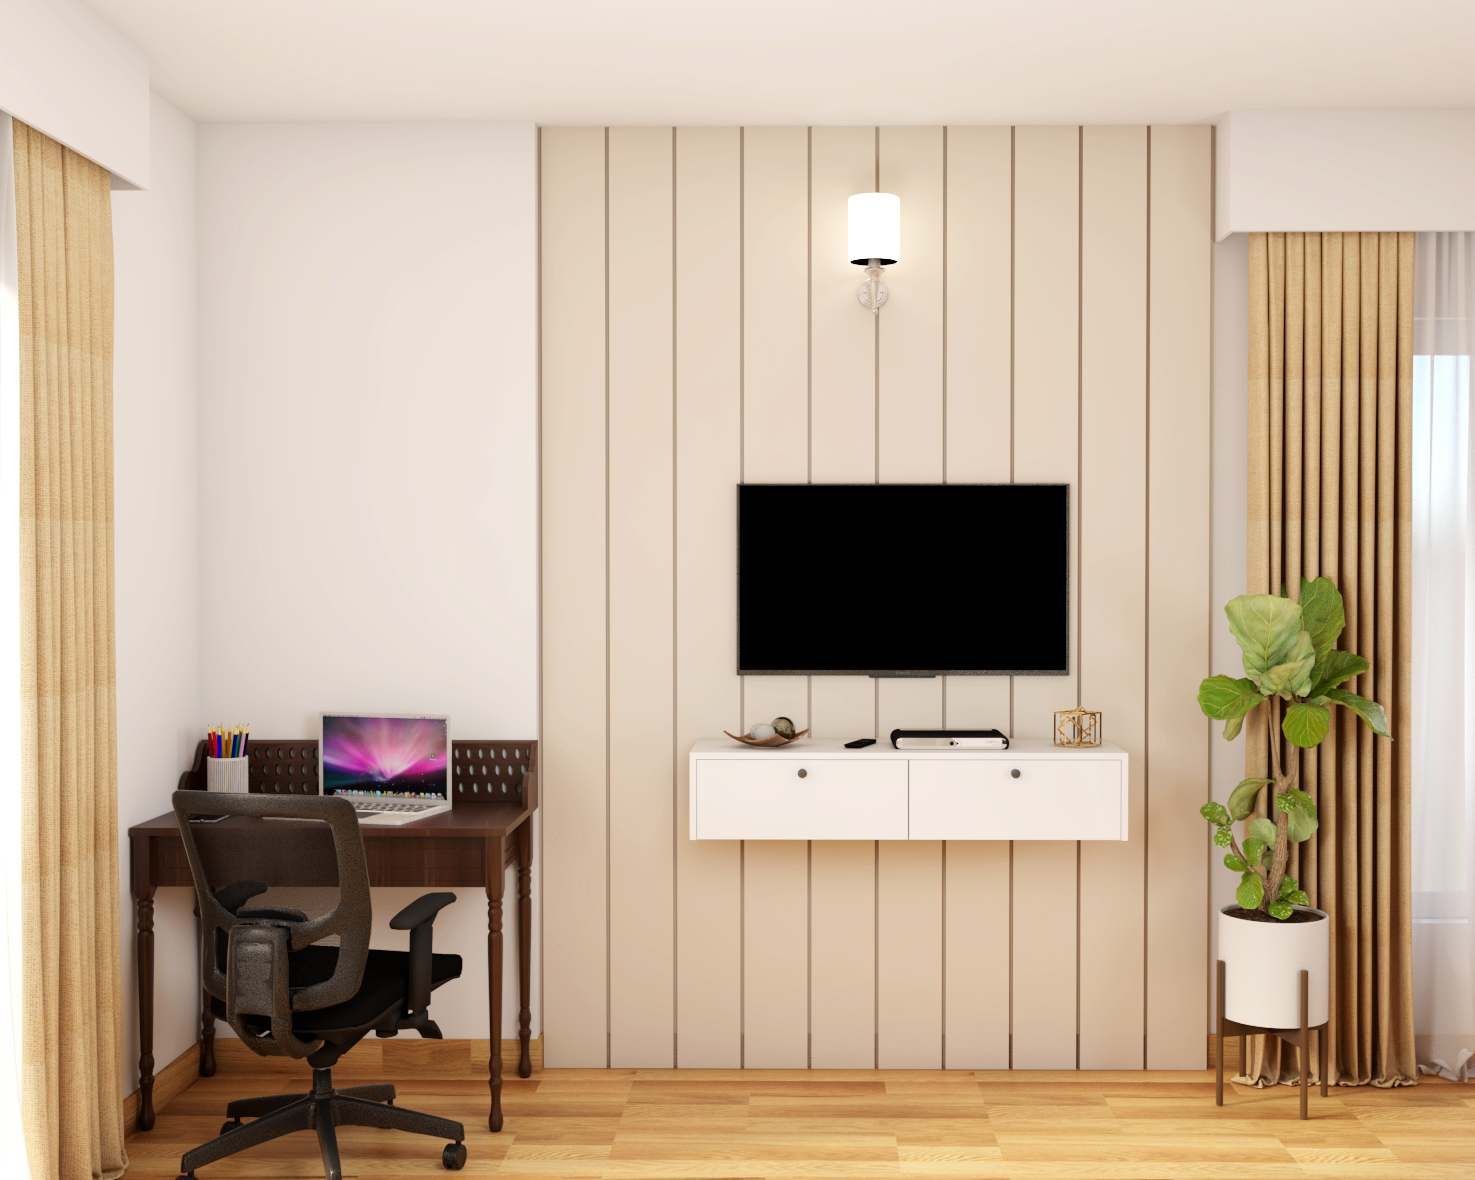 Simple and Compact TV Unit Design with Beige Panel